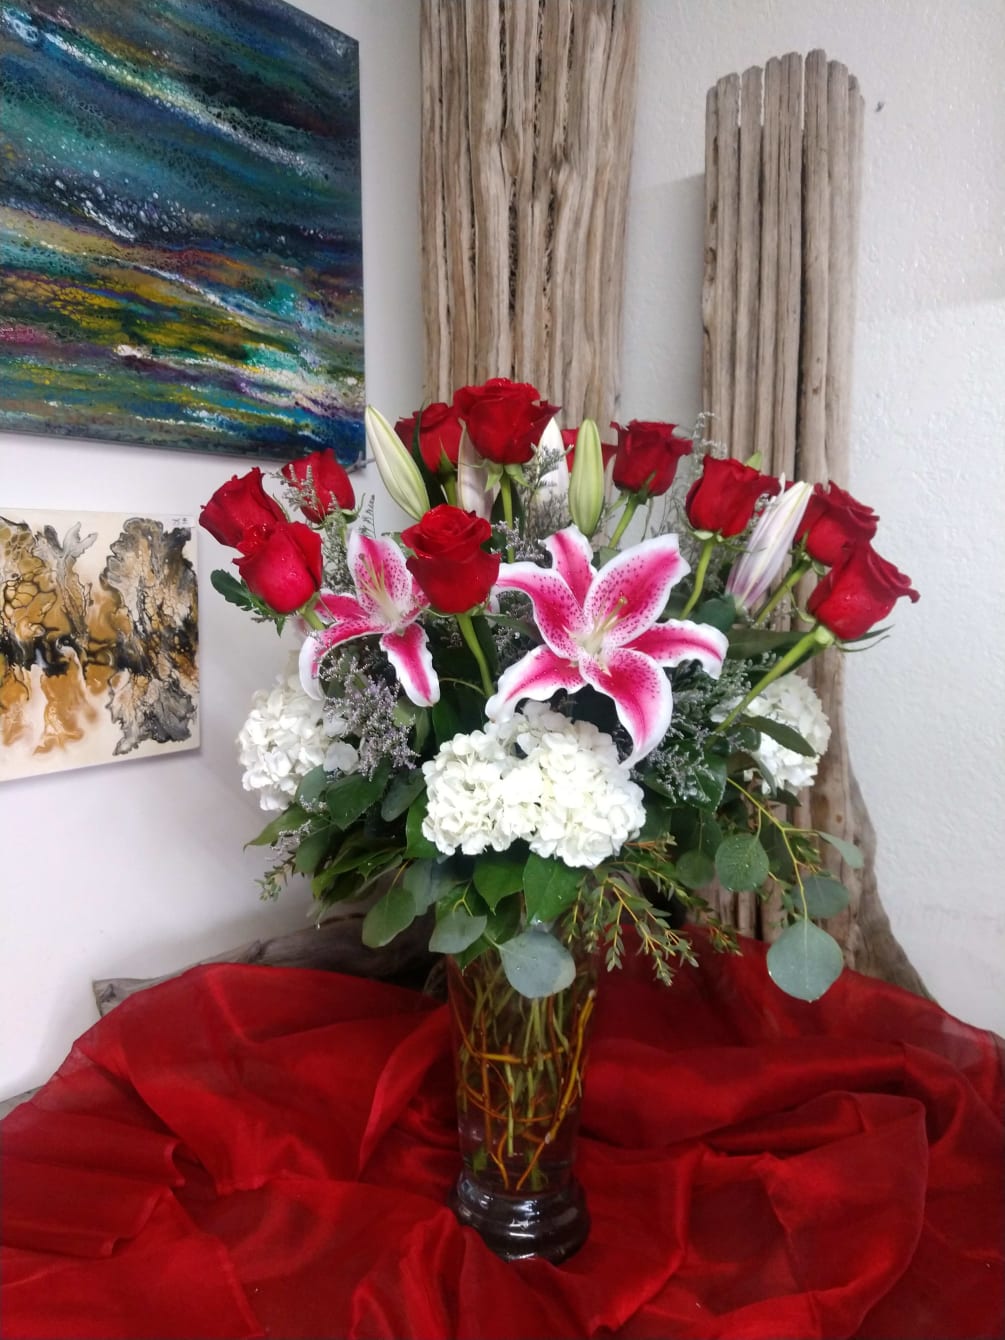 Lovely display of Roses,
Hydrangeas and stargazer lily.  This is sure to